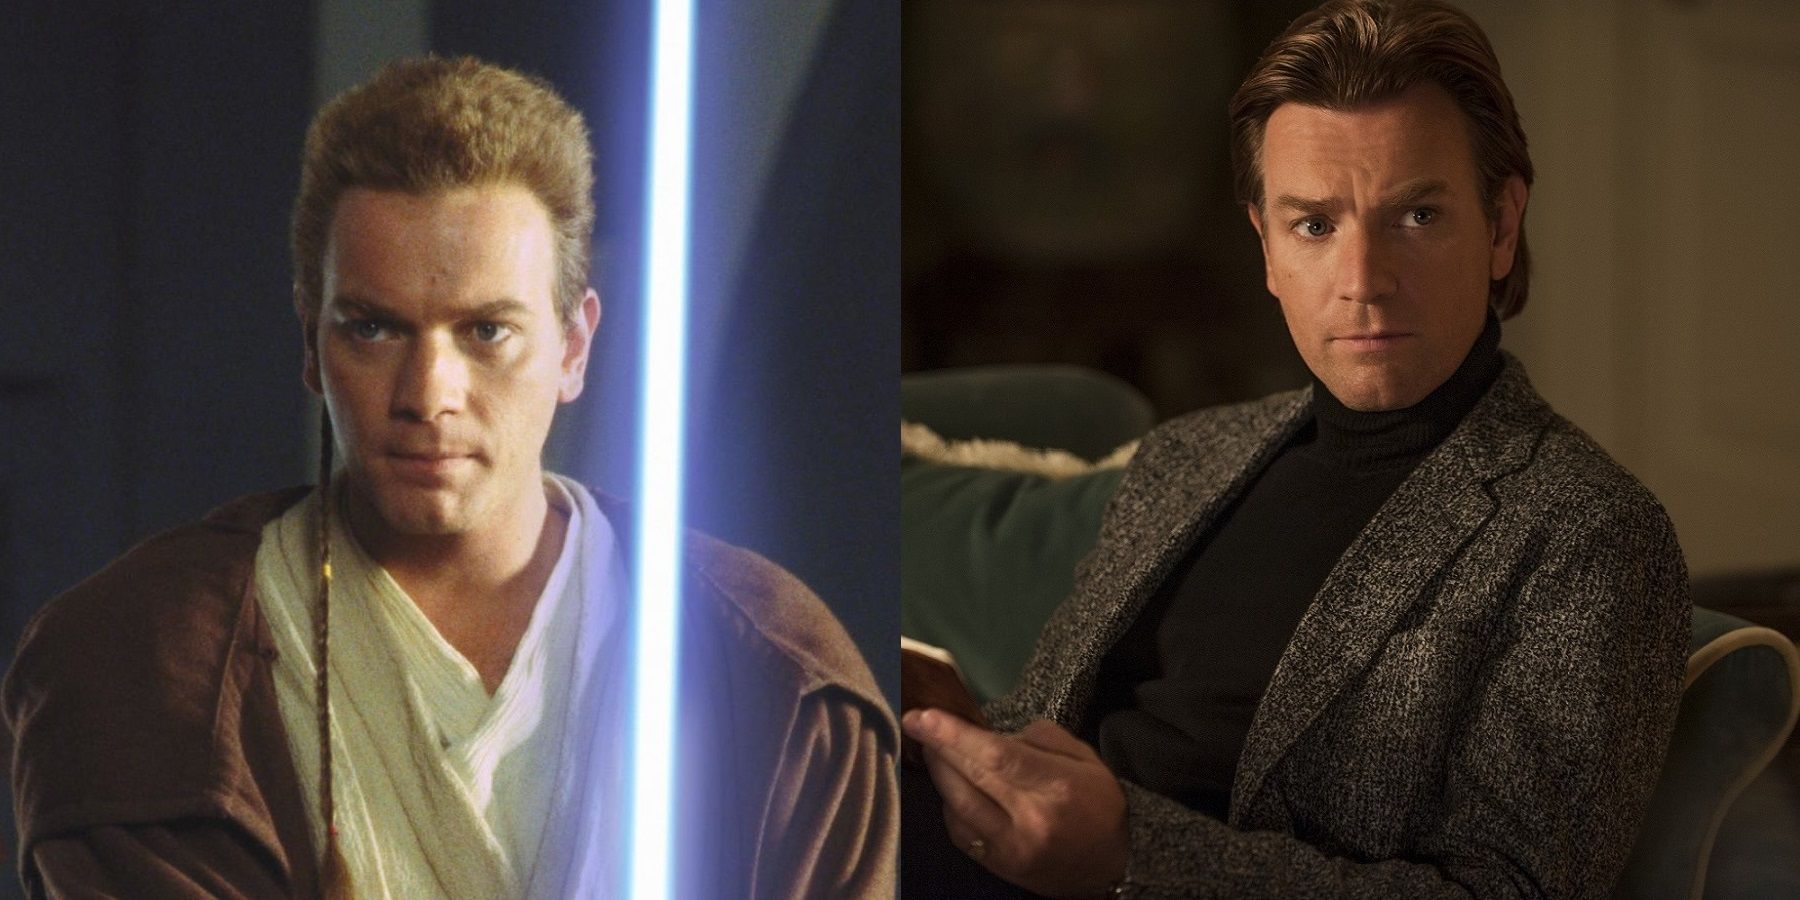 Where Are They Now Ewan McGregor in Star Wars and Mortdecai